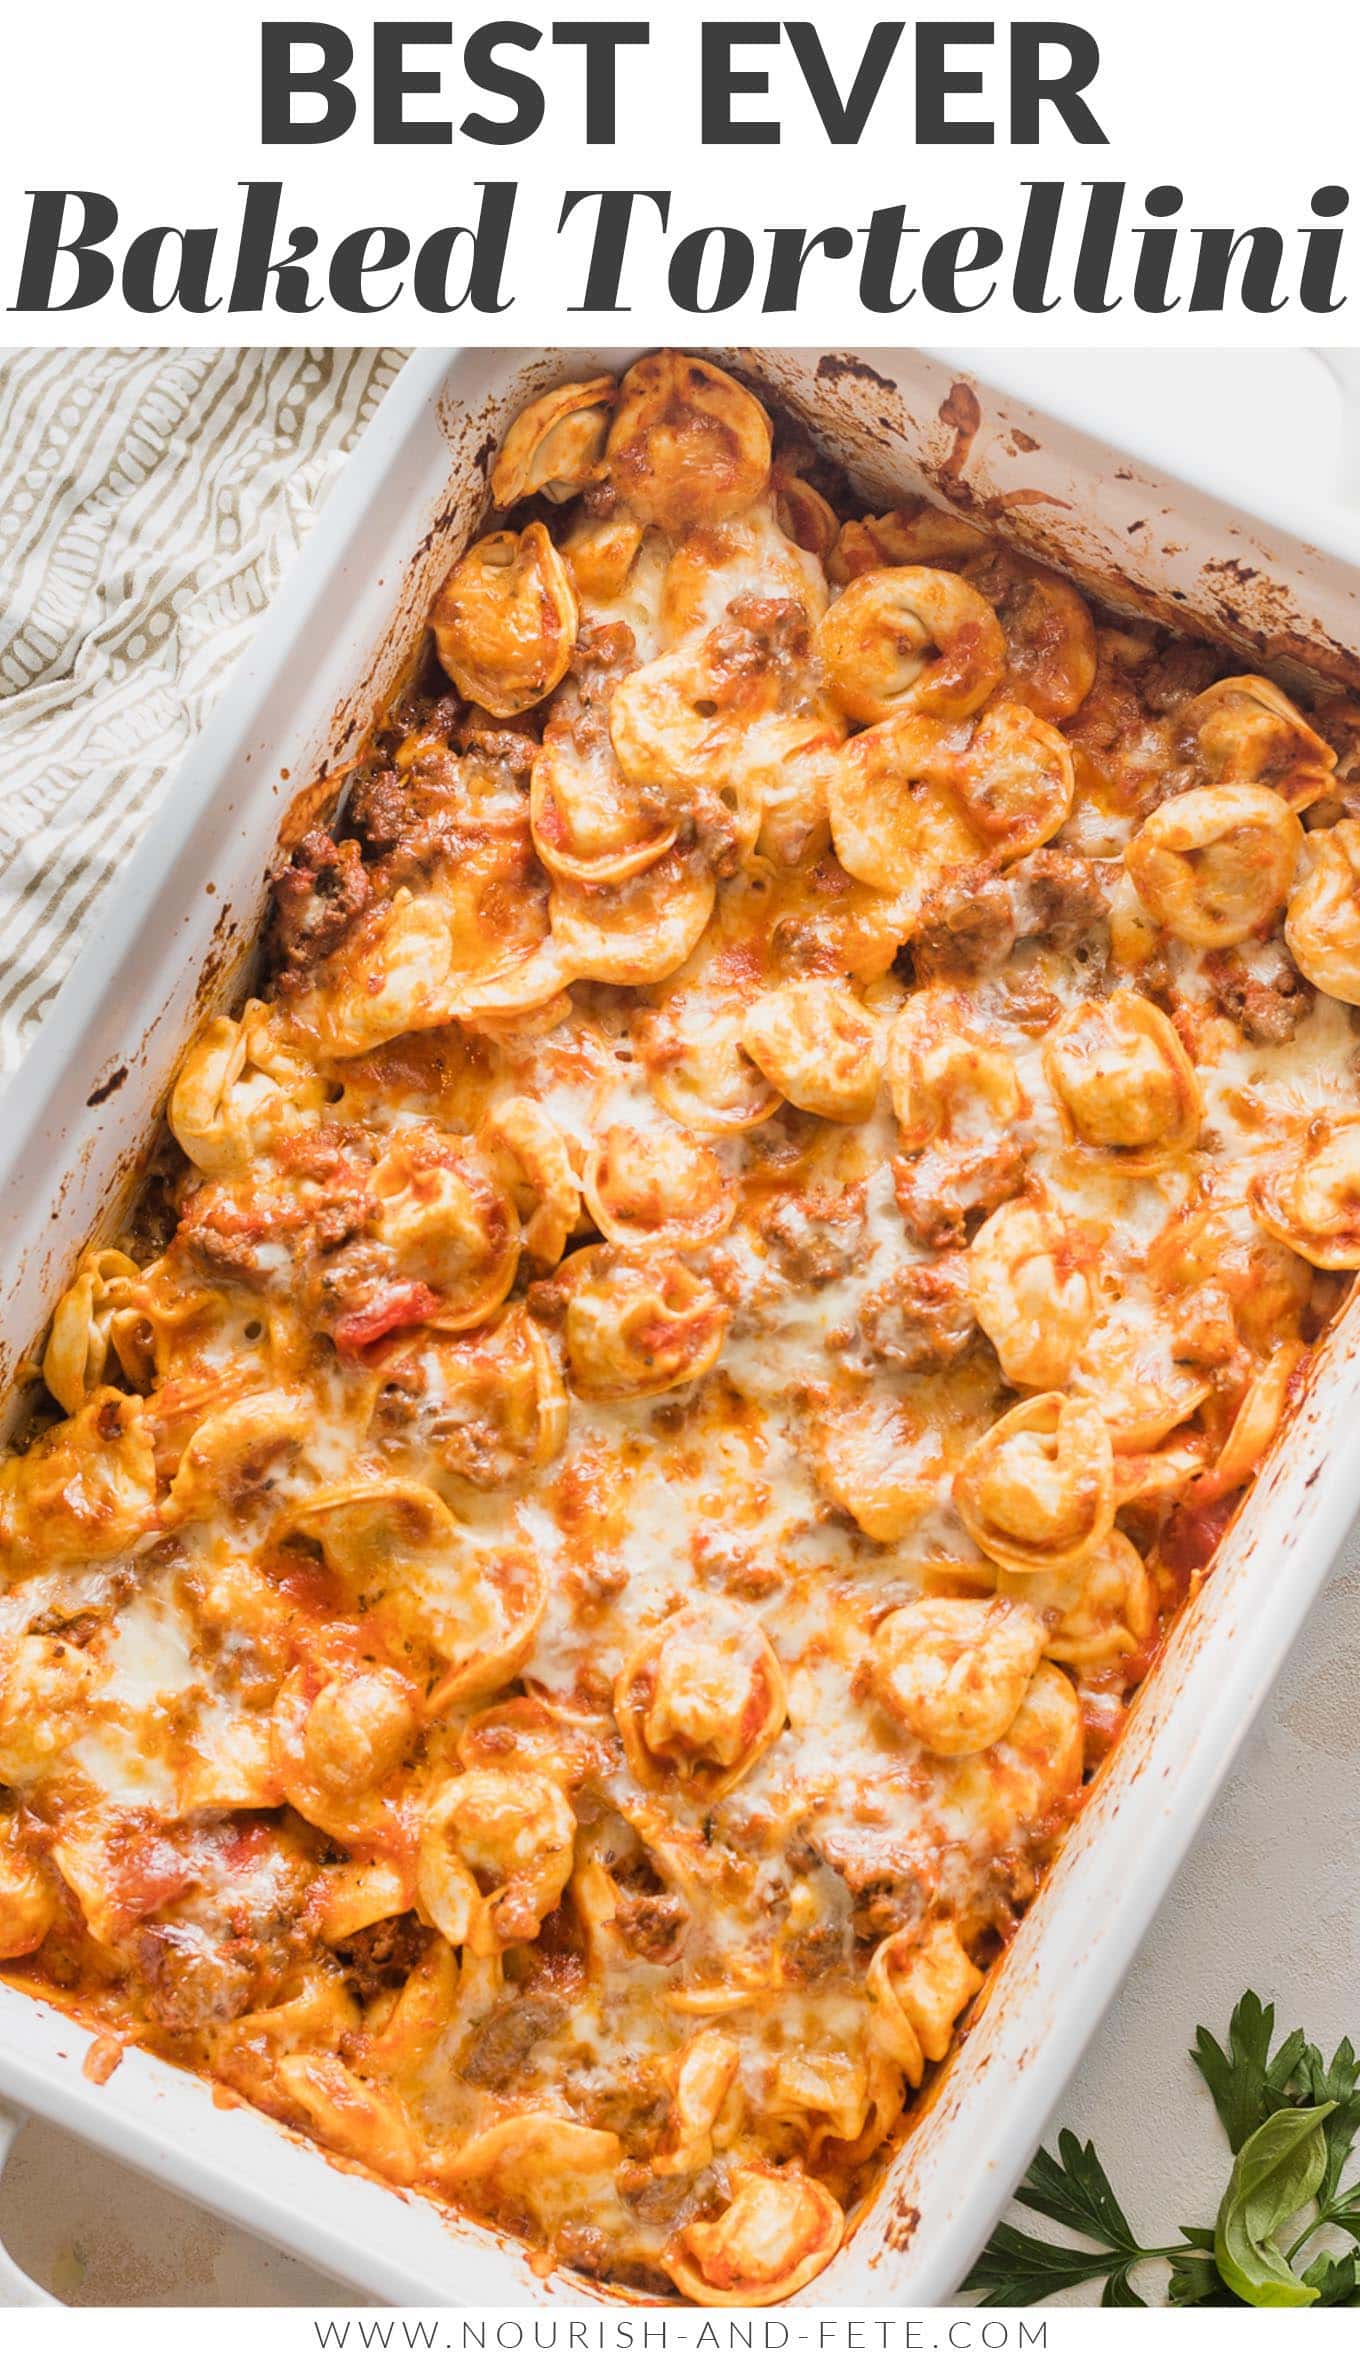 Baked Tortellini (10 Minutes Prep!) - Nourish and Fete